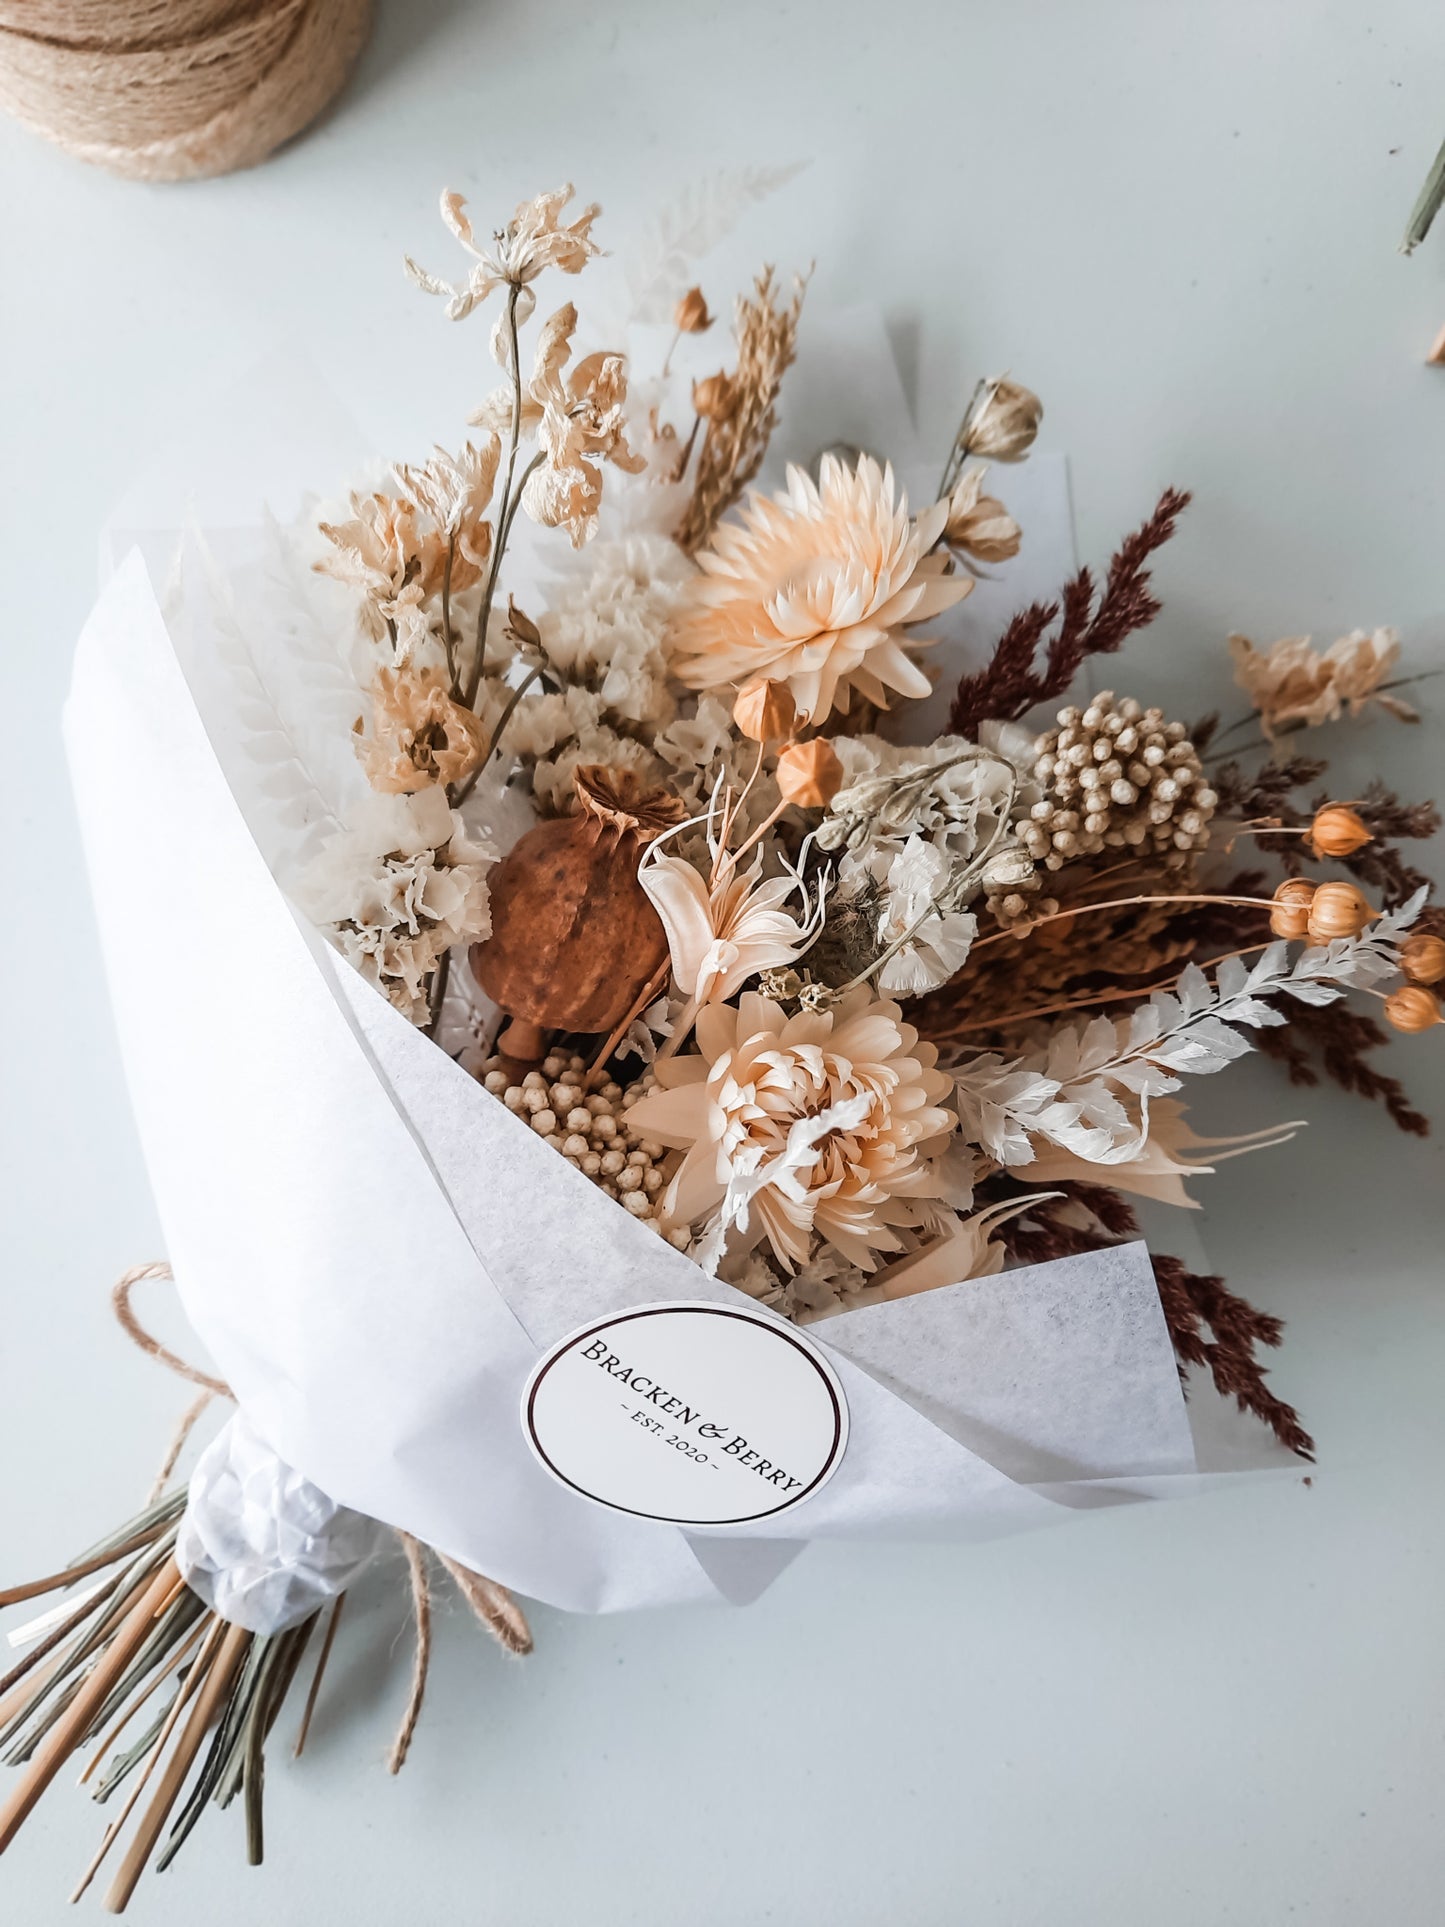 Dried flower posy wrapped in tissue paper - earthy neutral tones.